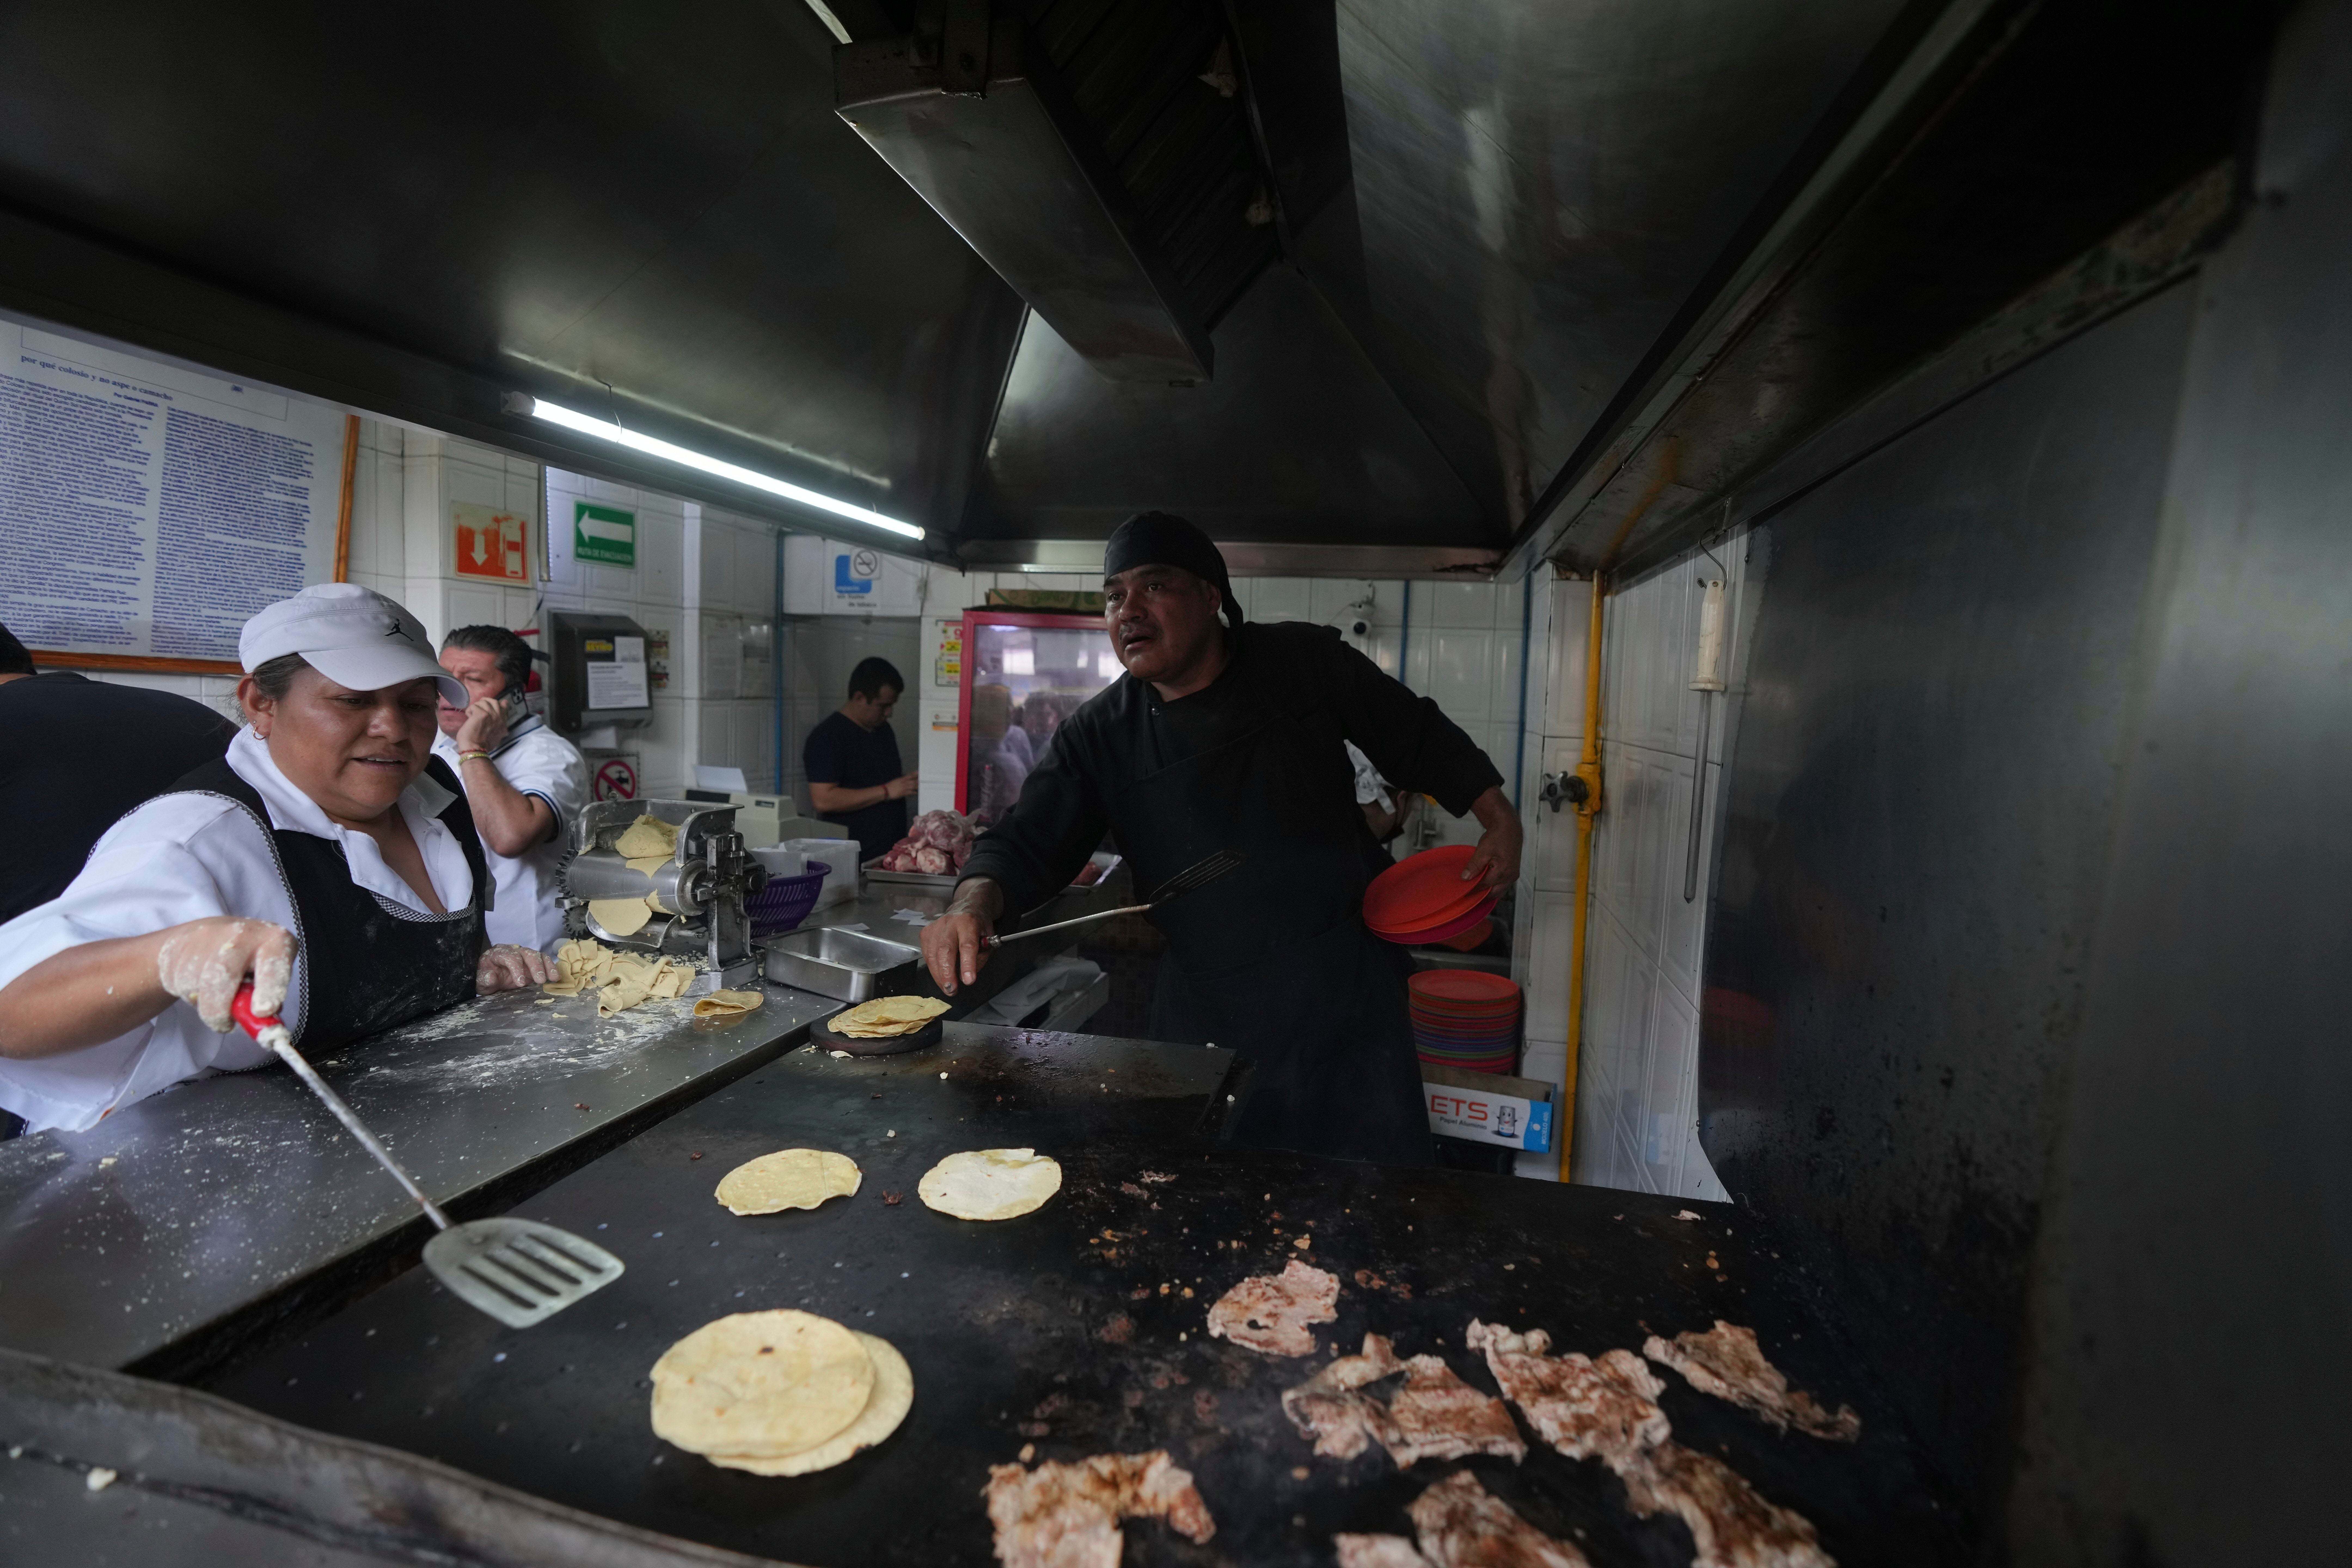 A worker warms corn tortillas on a griddle at the Tacos El Califa de León taco stand, in Mexico City